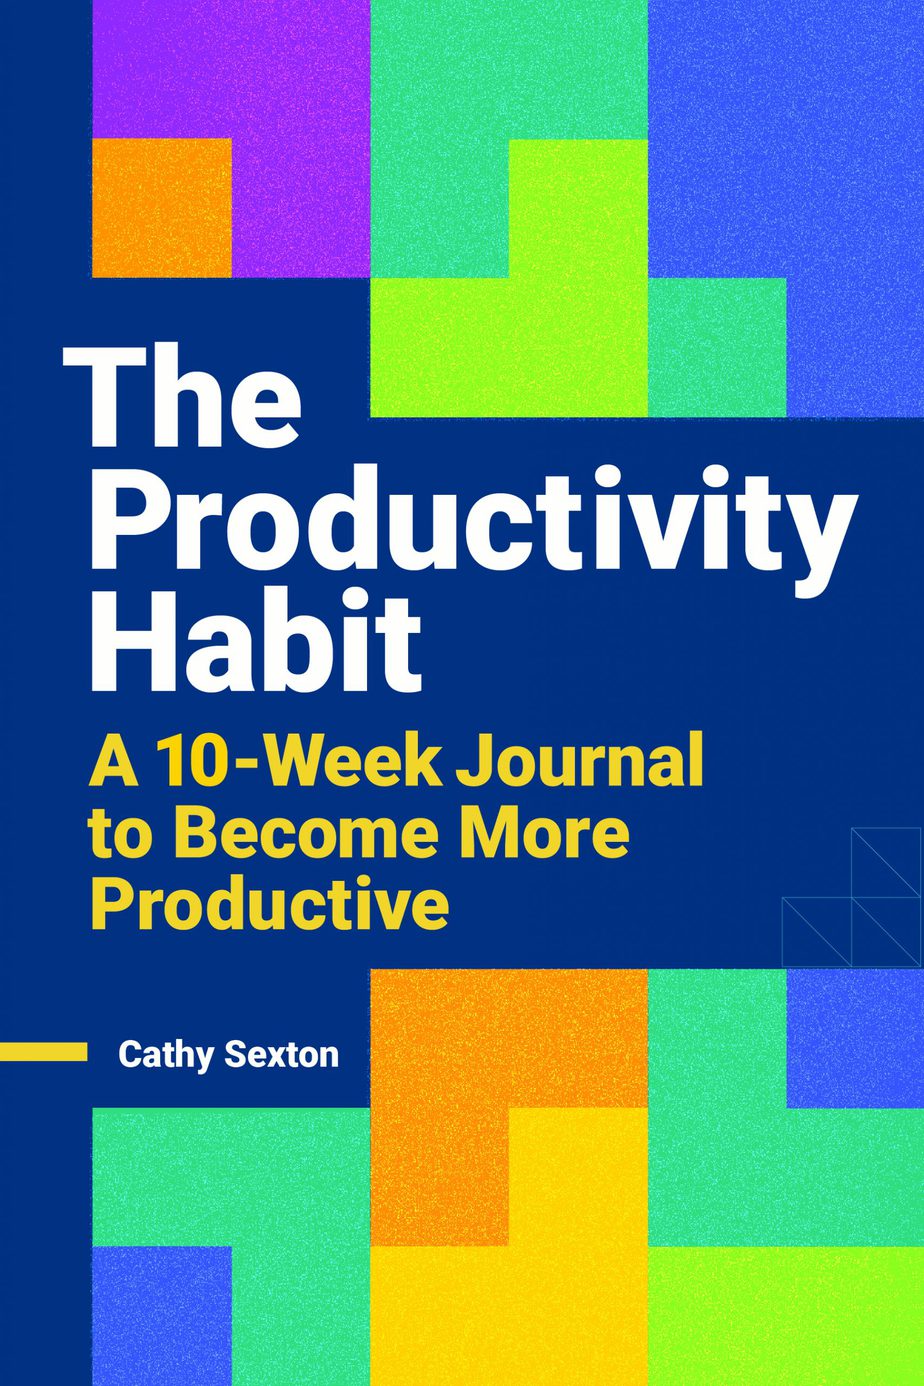 The Productivity Habit Journal to Become More Productive